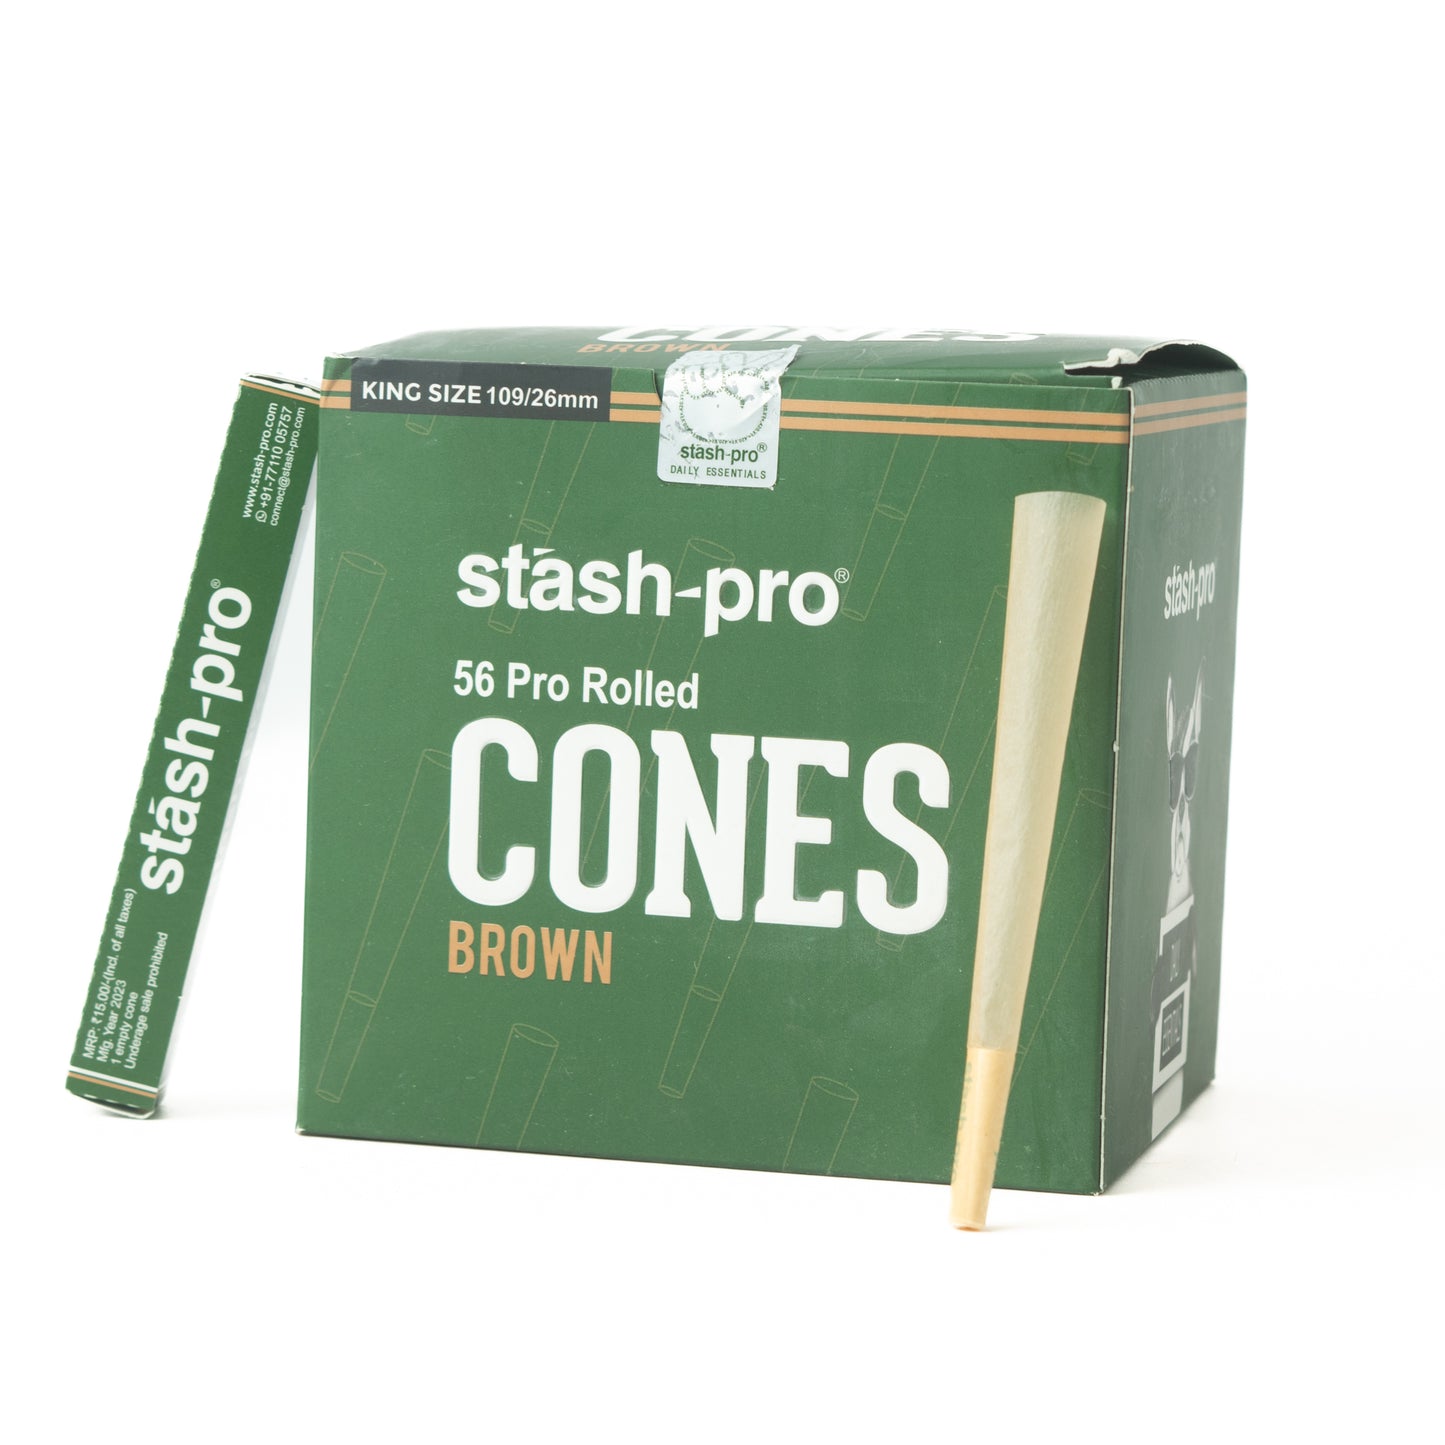 Stash Pro Pre Rolled Cones (Brown) - Perfect Roll (Pack of 5 Cones)